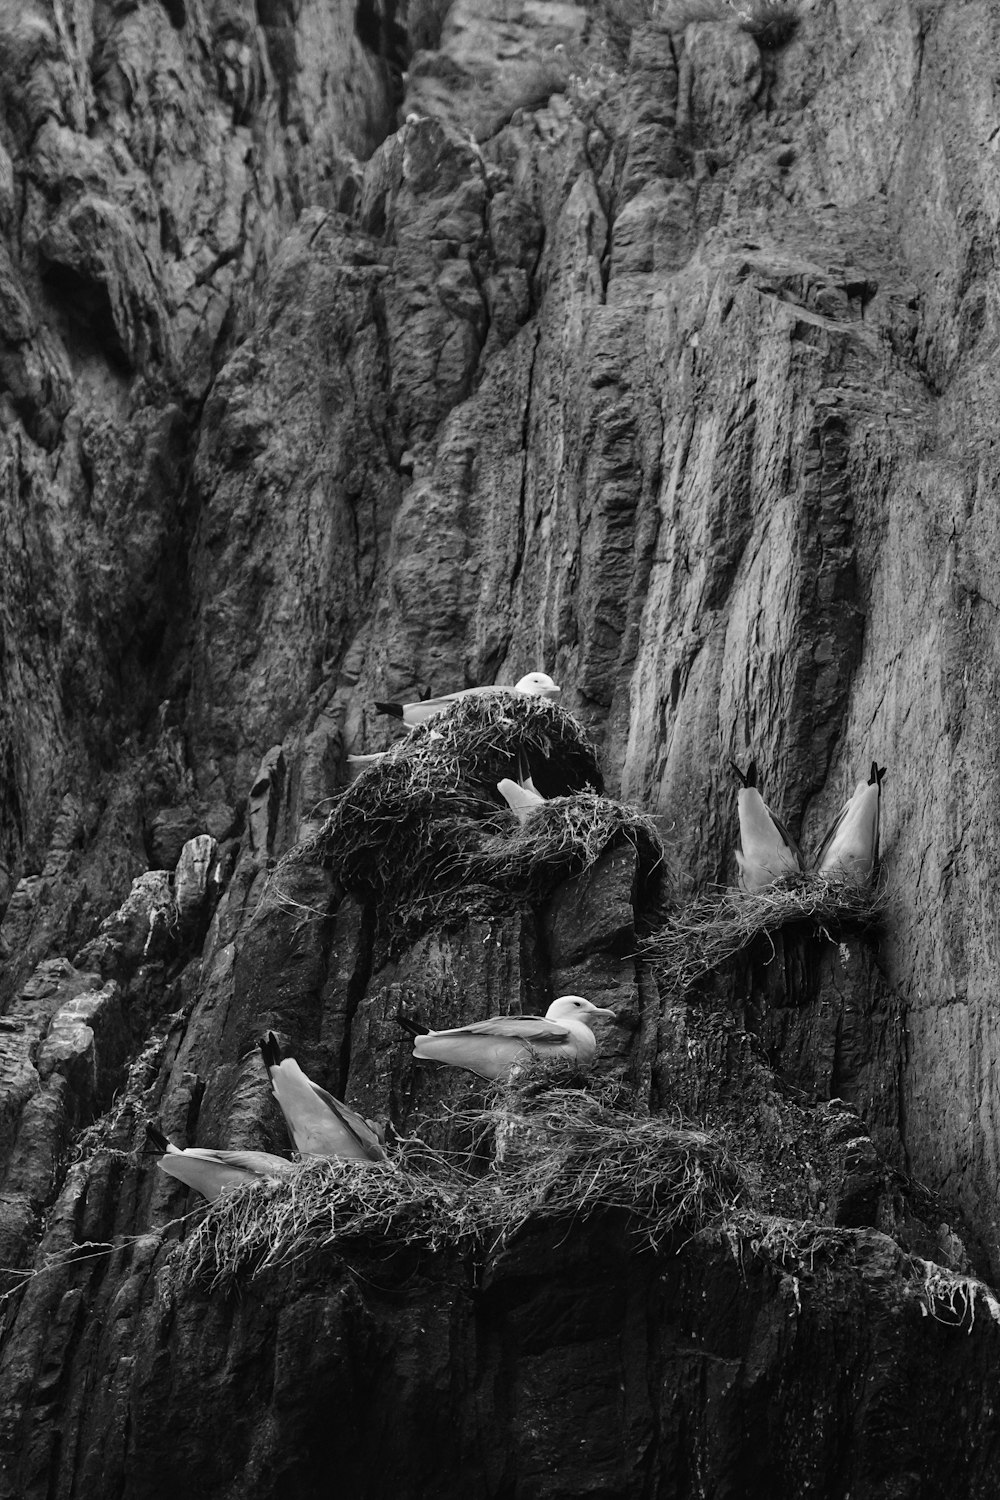 a black and white photo of seagulls nesting on a cliff